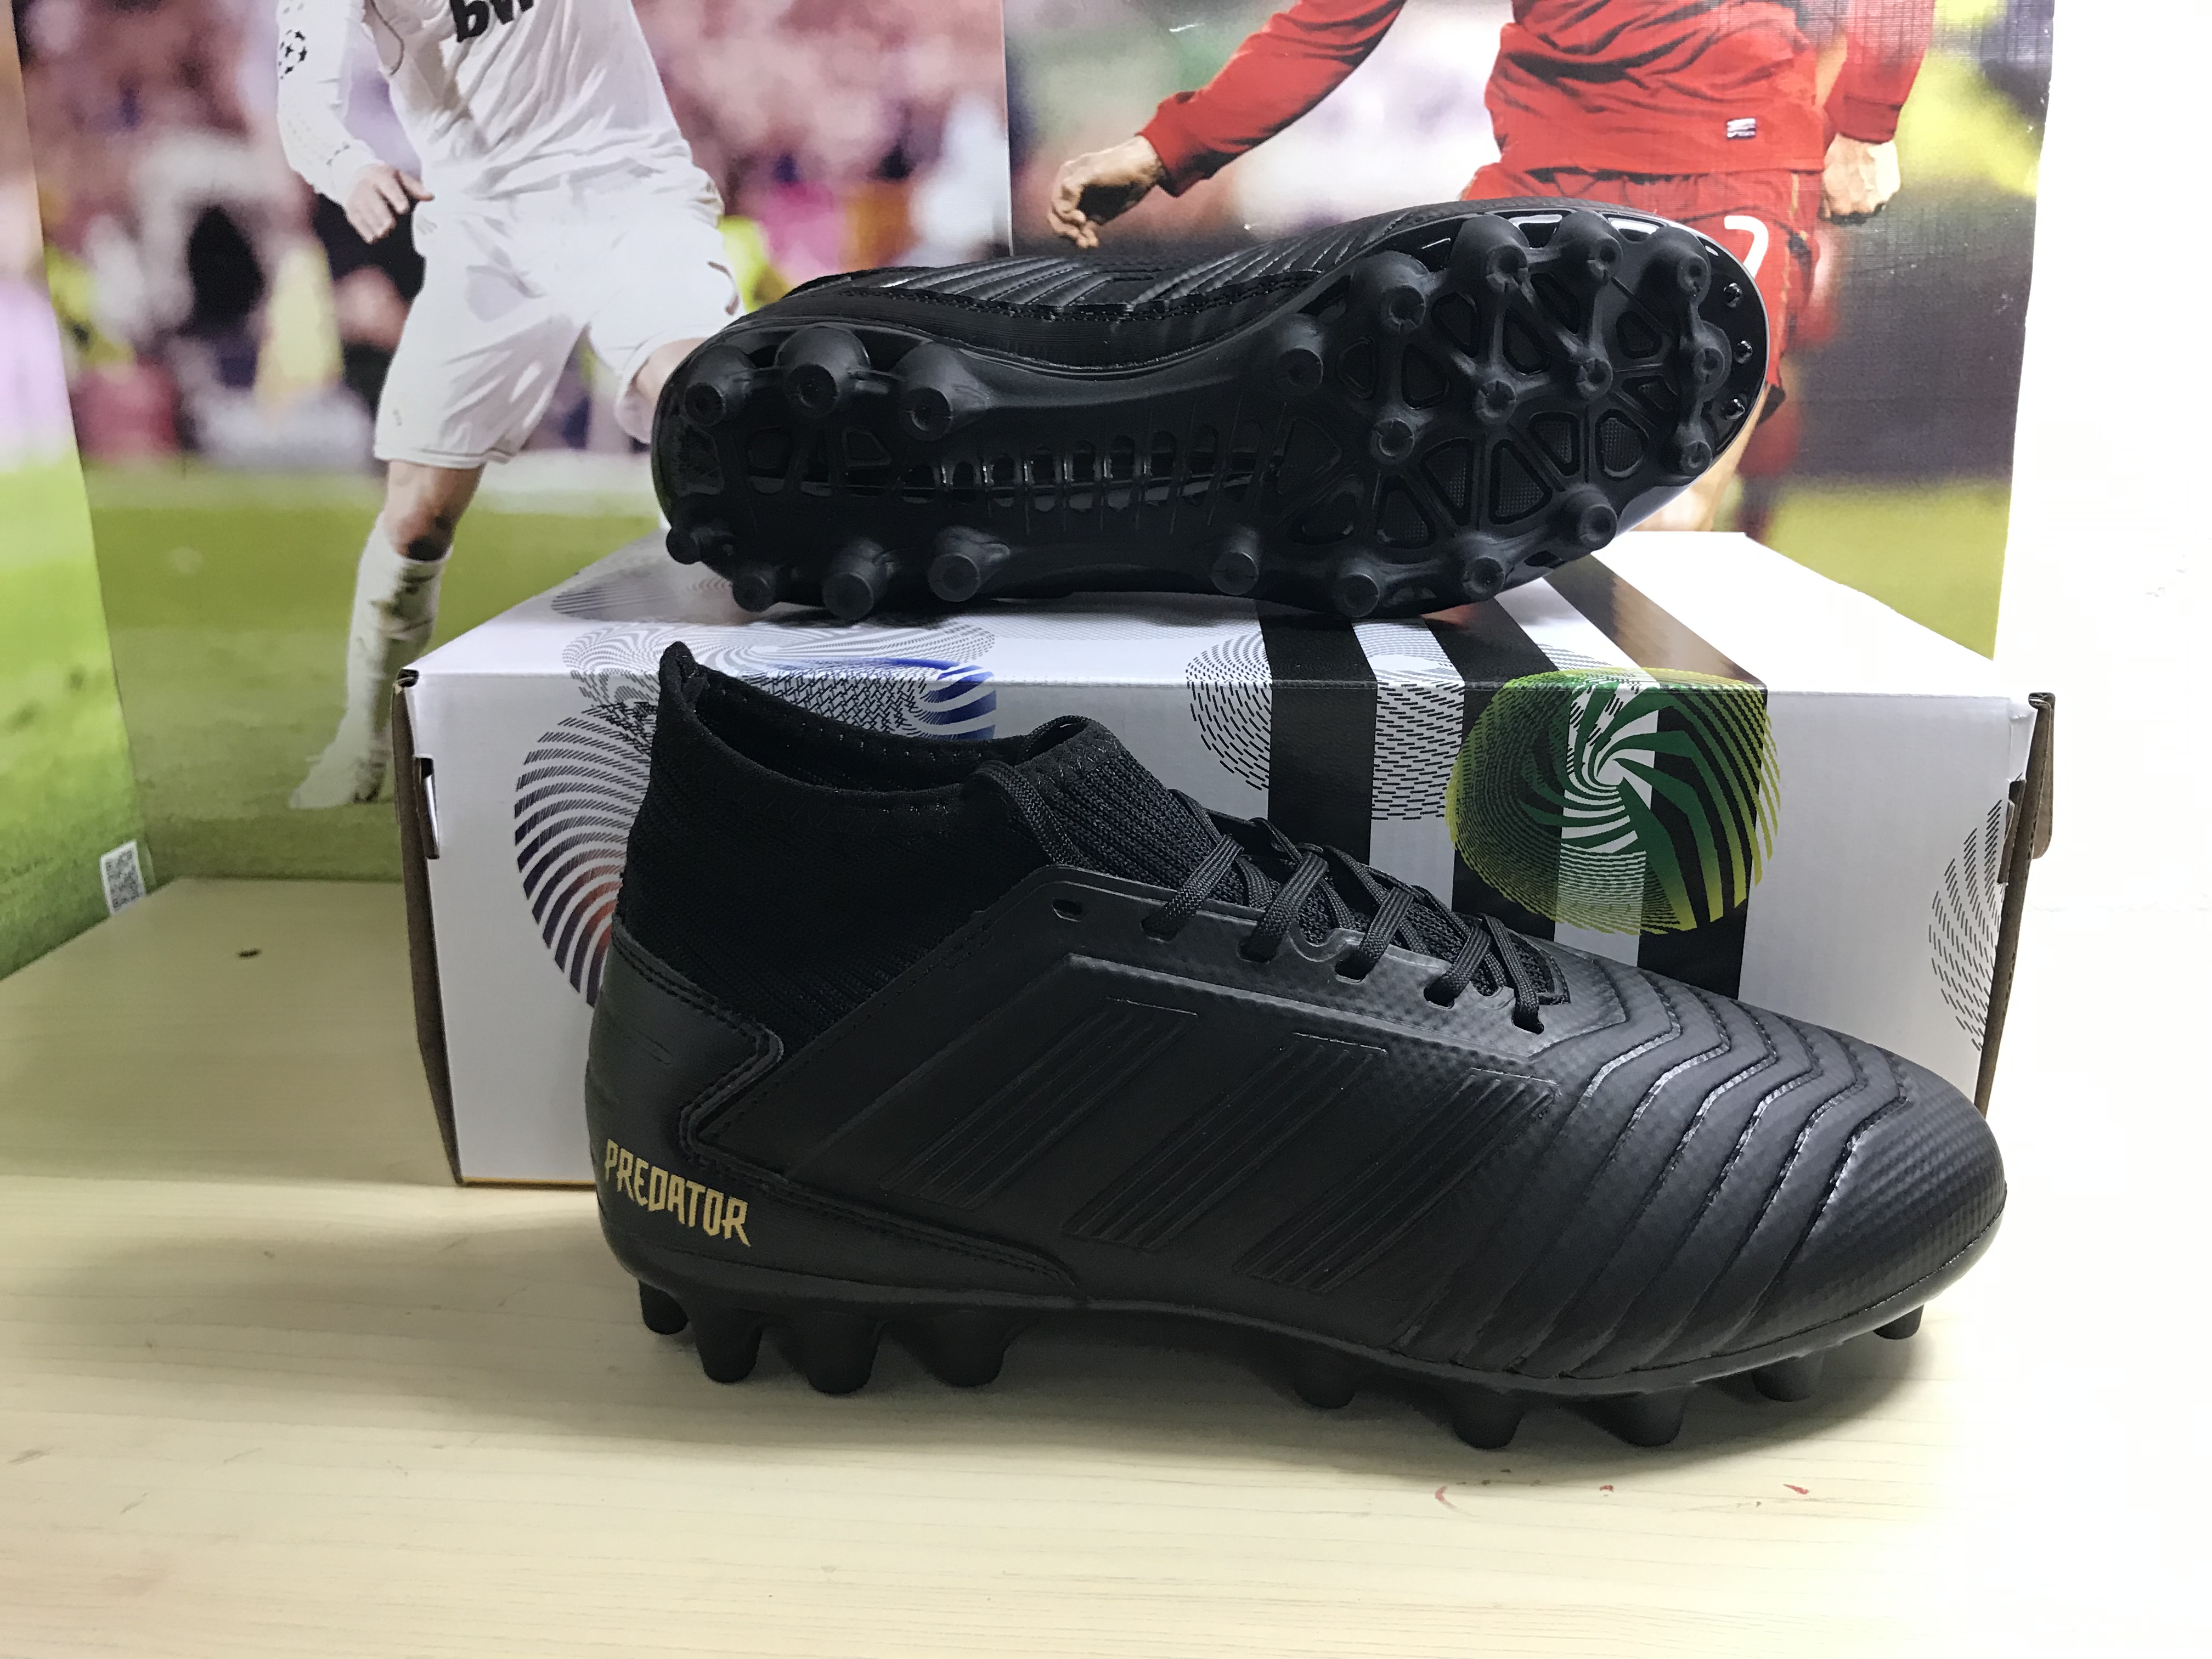 Adidas Predator 19.1 AG Black EF8982 - Dynamic Performance and Superior Traction for Agility